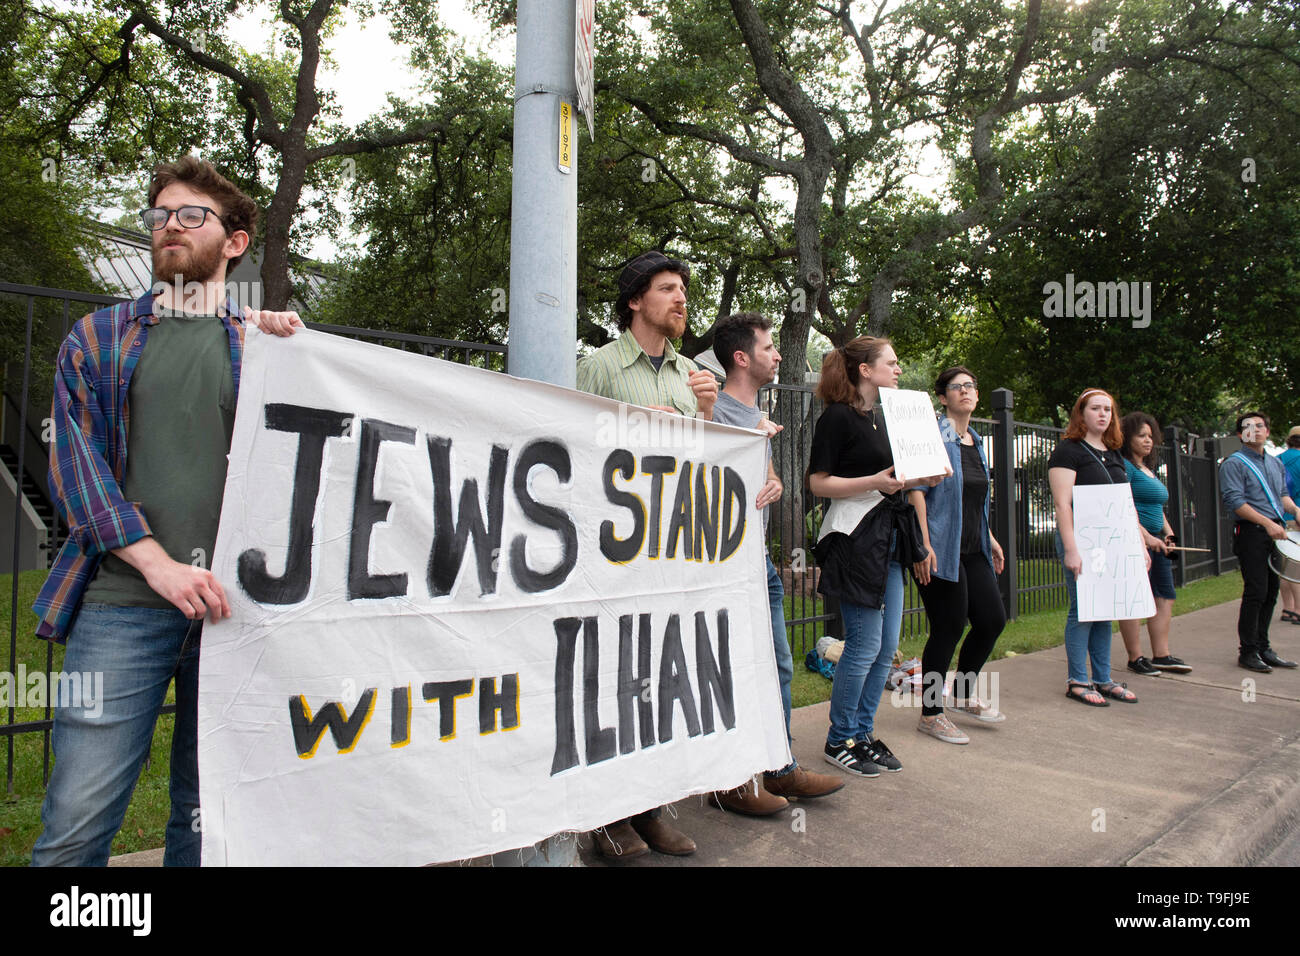 Supporters of controversial Congresswoman Ilhan Omar of Minnesota counter-demonstrate against anti-Muslim protesters as she spoke at Austin's annual city-wide iftar dinner in honor of the 14th day of Ramadan. Omar is one of two Muslims serving in the United State Congress. Stock Photo